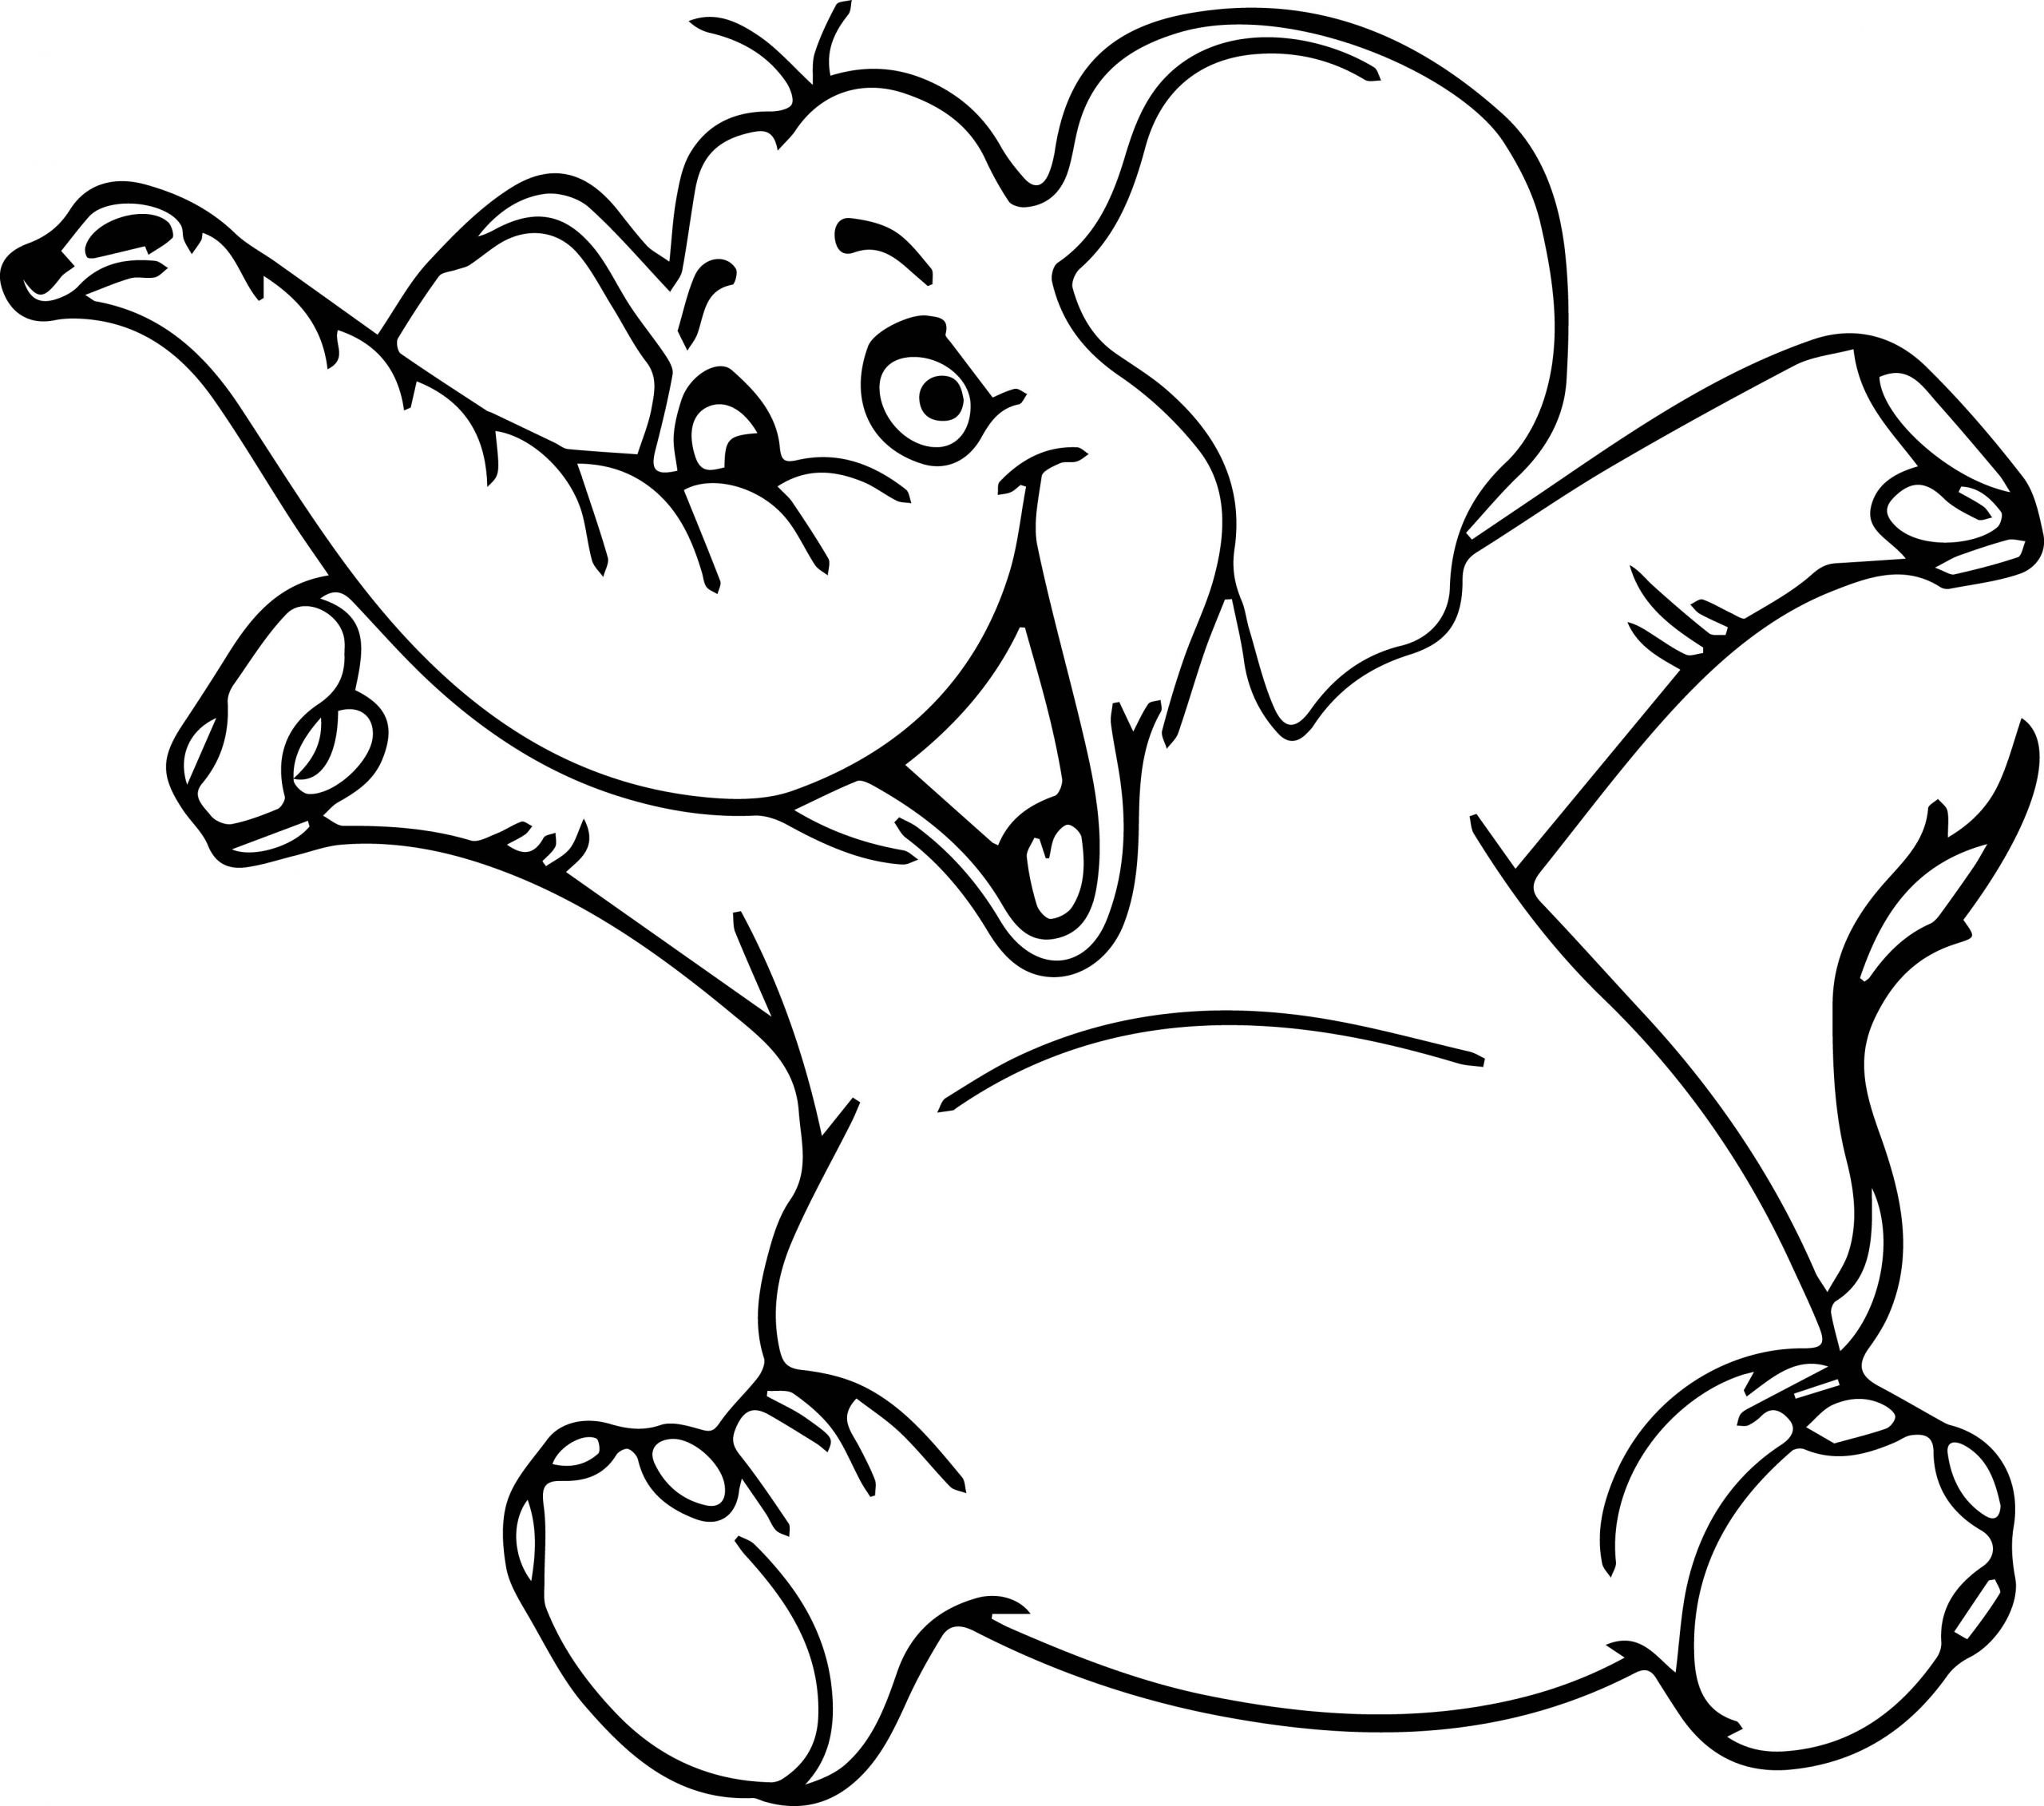 Baby Elephant Coloring Pages
 Cartoon Baby Elephant Coloring Page